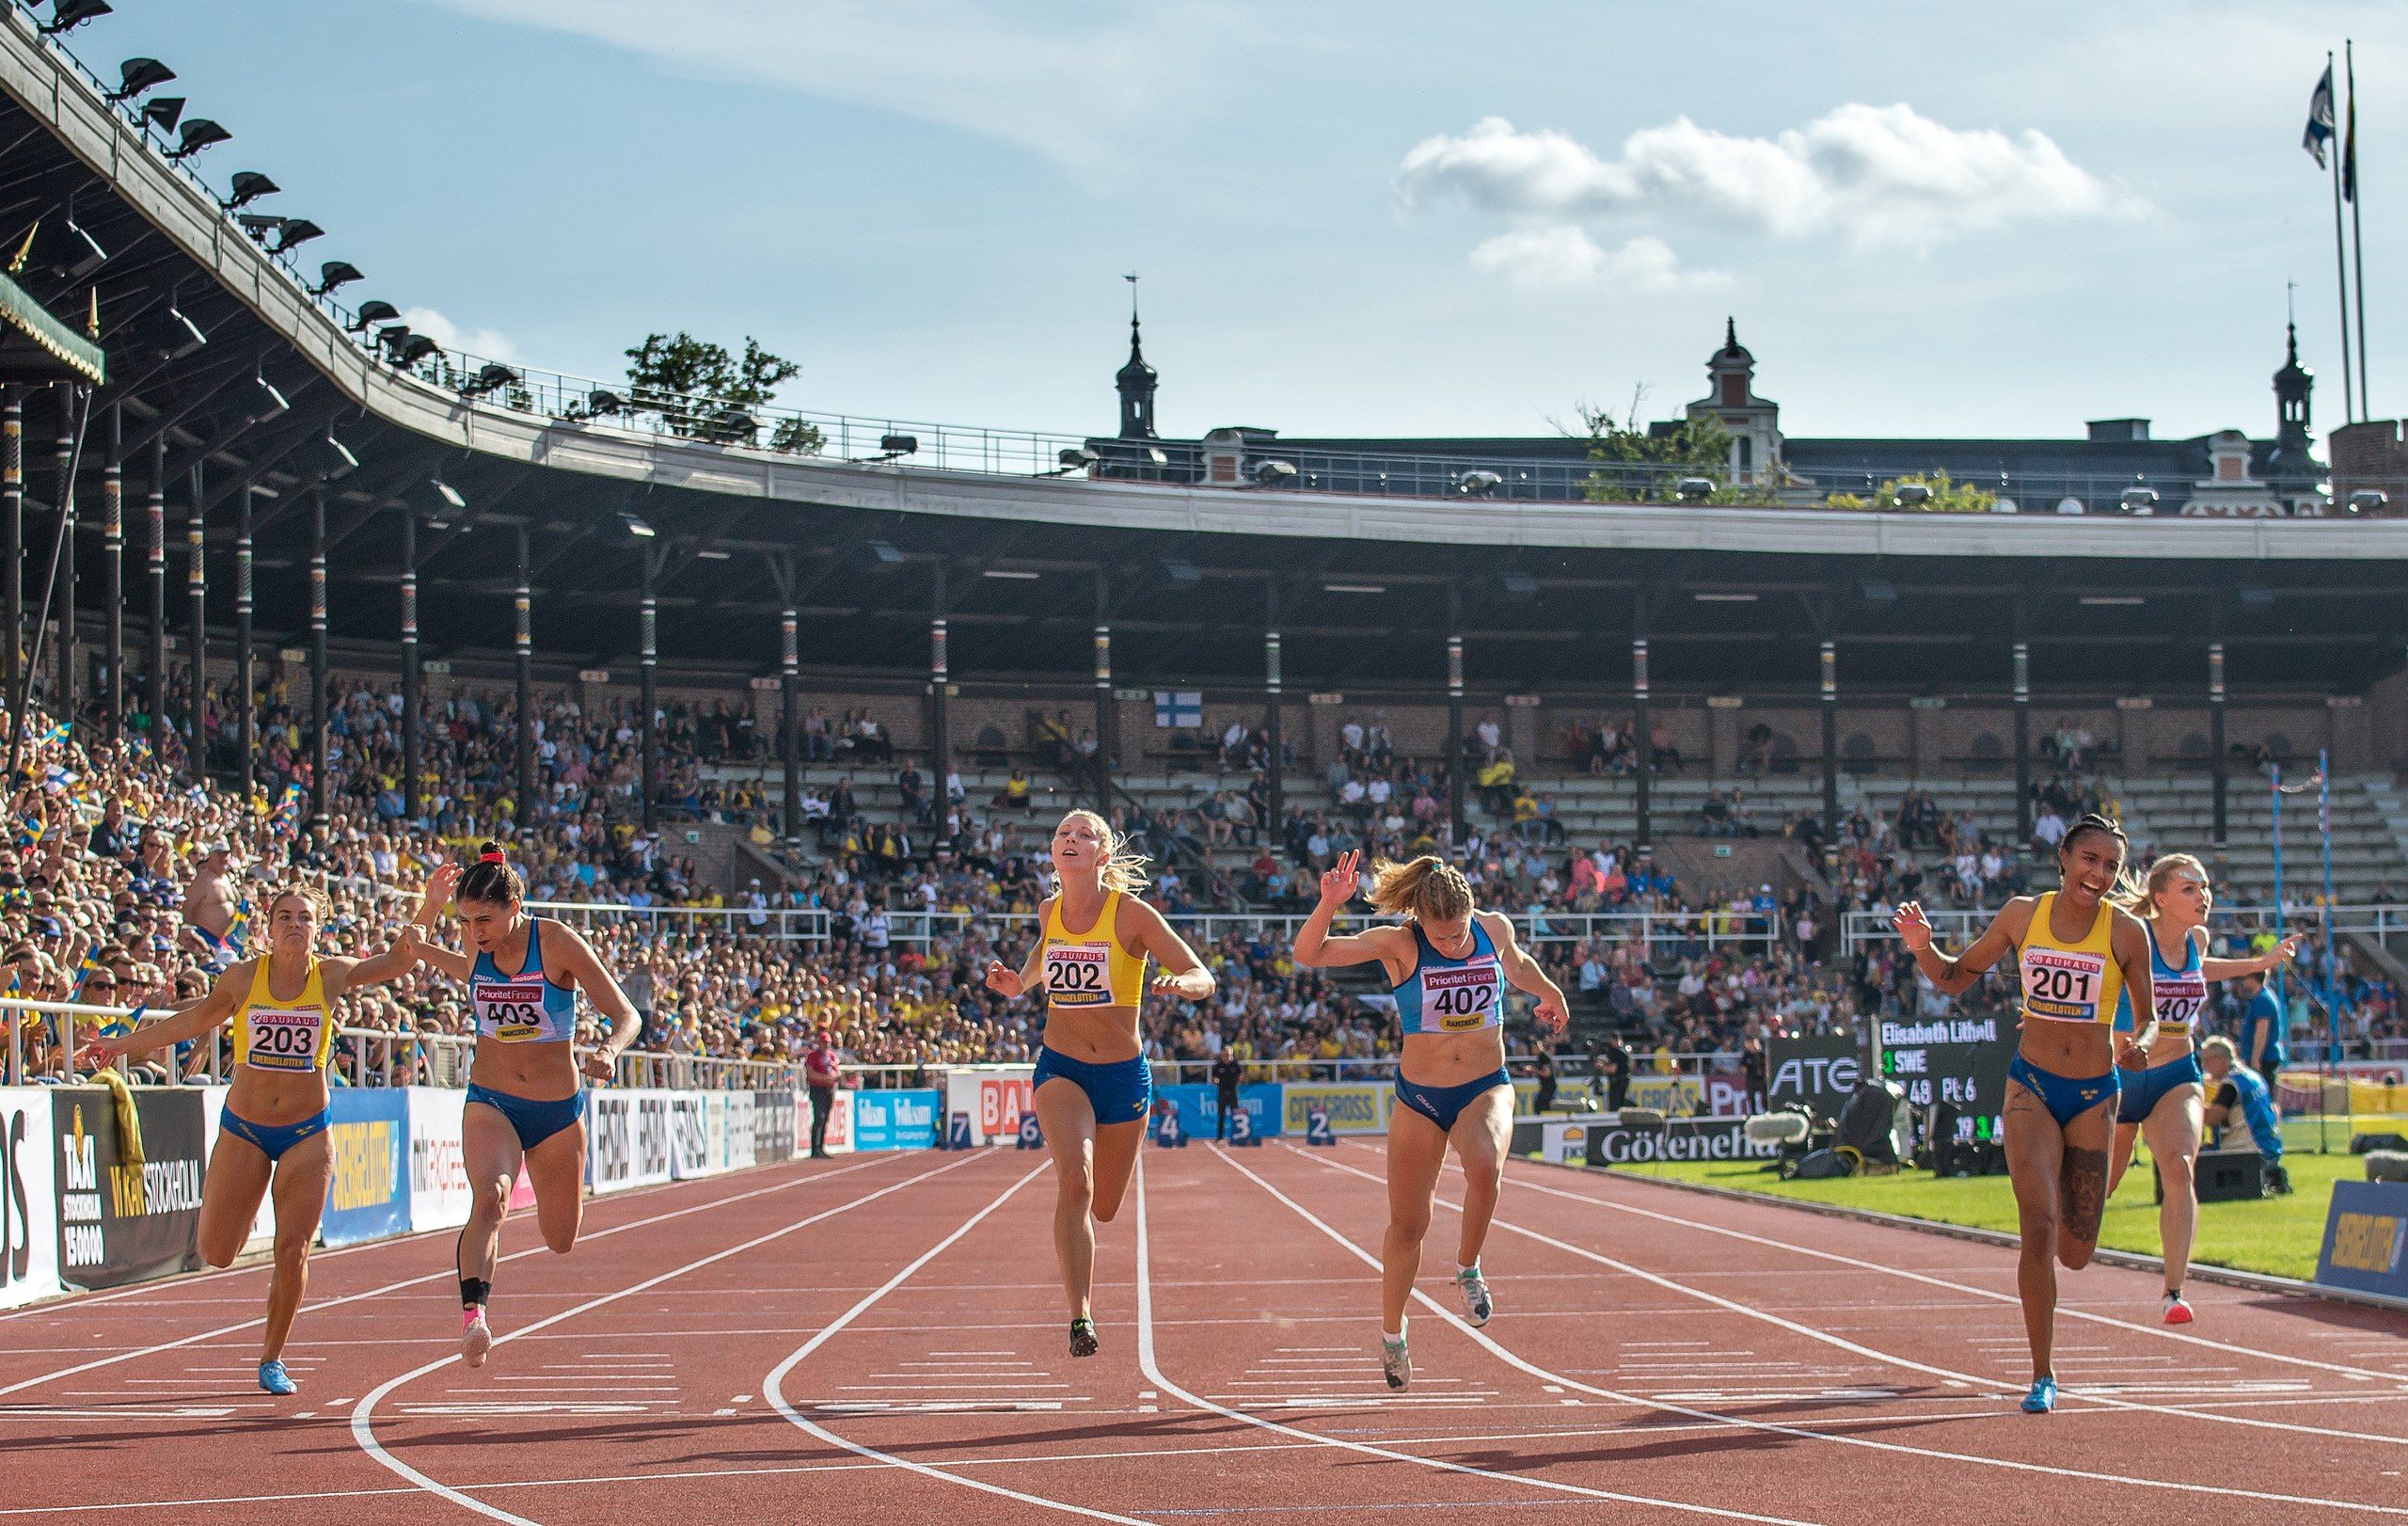 The women's 100m at the Finland vs Sweden International Match in 2019